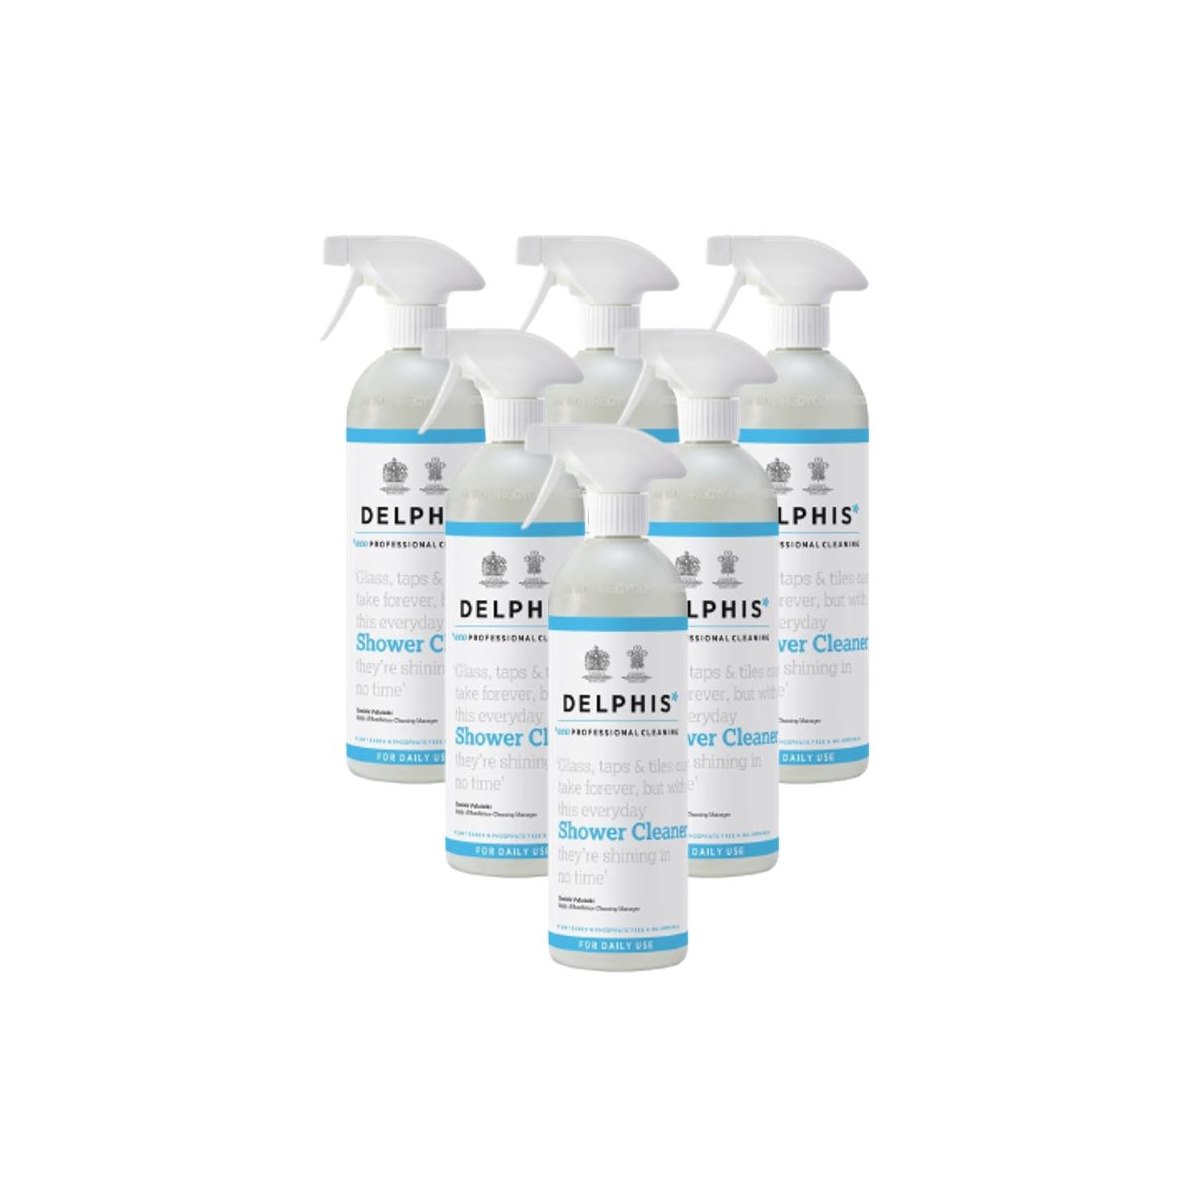 Case of 6 x Delphis Eco Professional Cleaning Shower Cleaner Spray 700ml